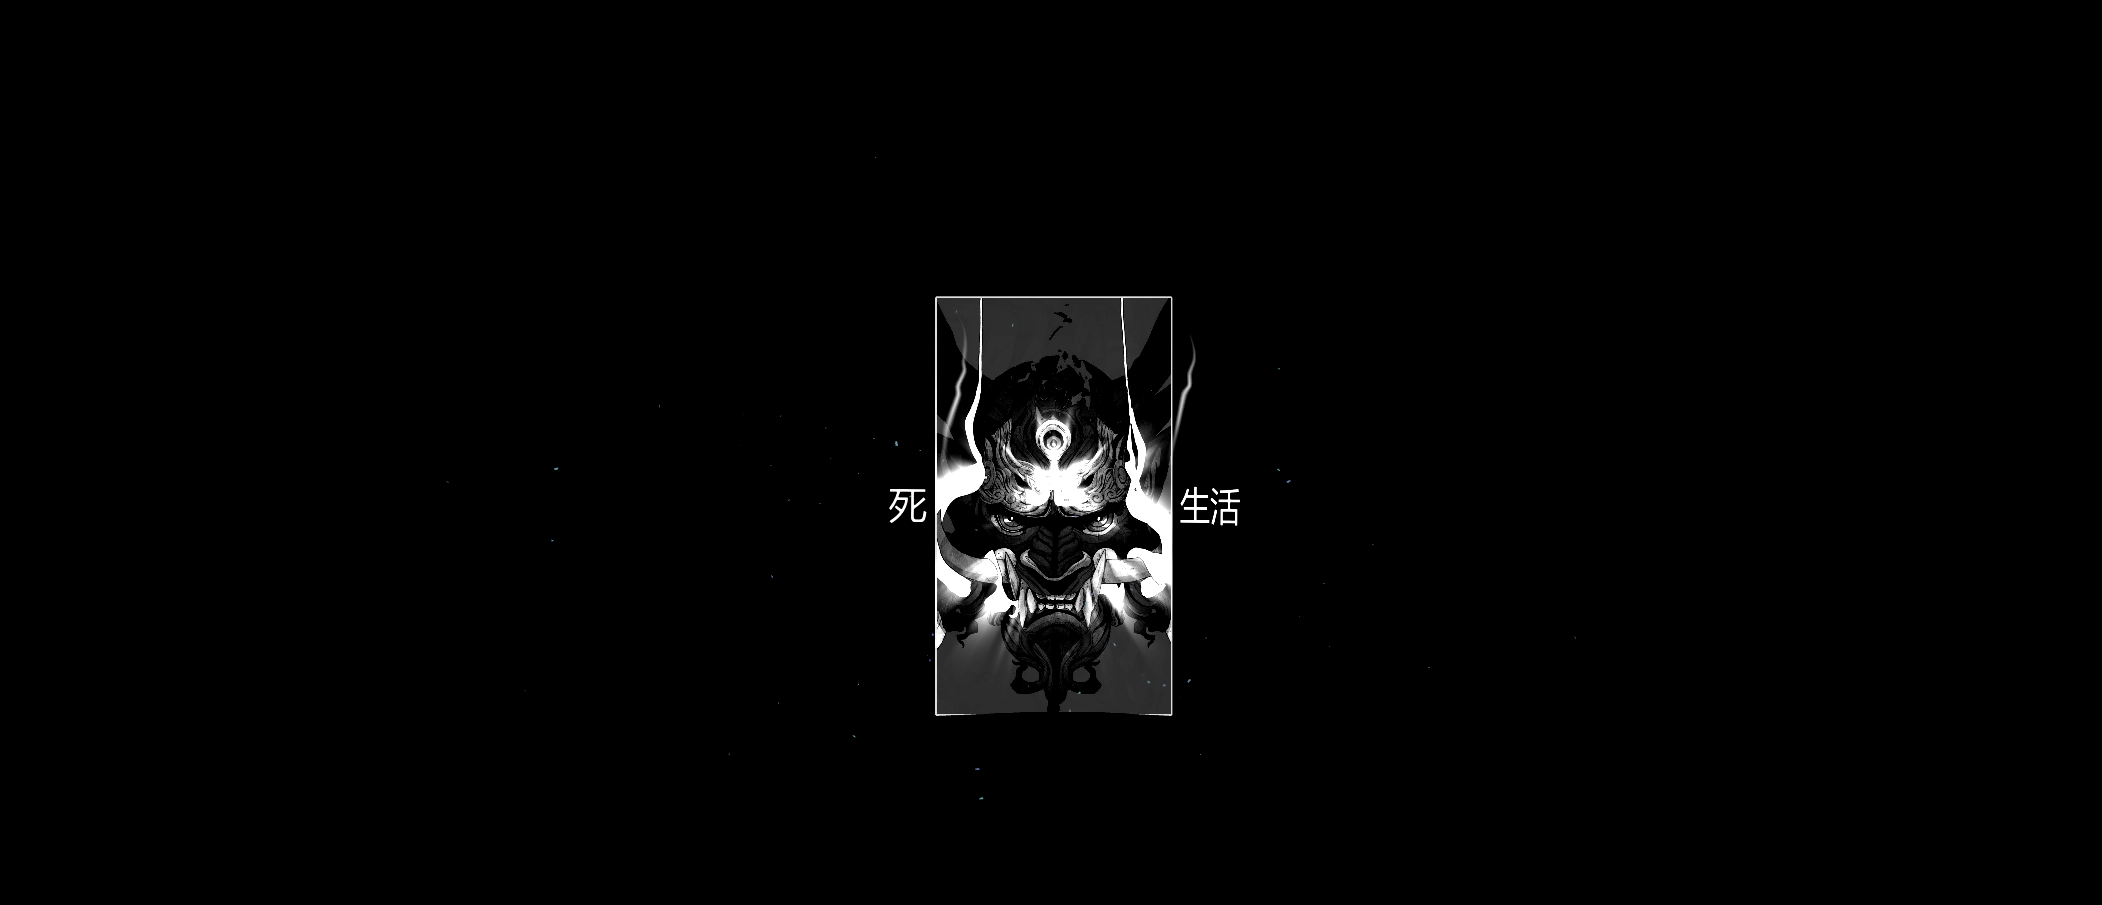 Do you guys know other black themed wallpaper with white details? Currently im using that Black Oni White, and I wanted more wallpaper like this one